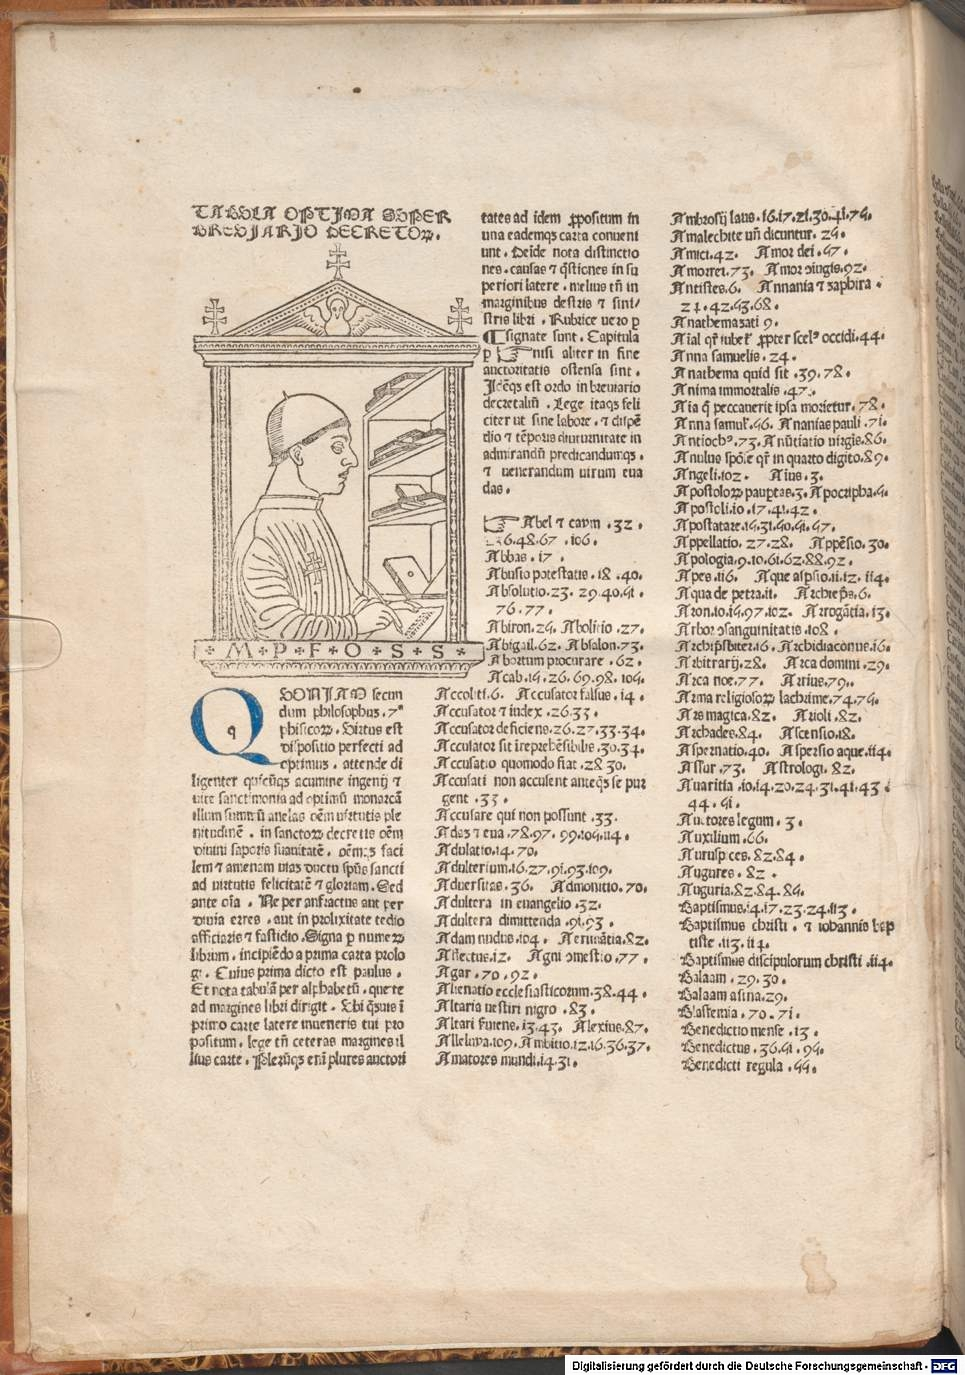 Detail from page of Breviarium (1479) printed by Pachel and Scinzenzeler depicting the author, Paulus Attavanti.